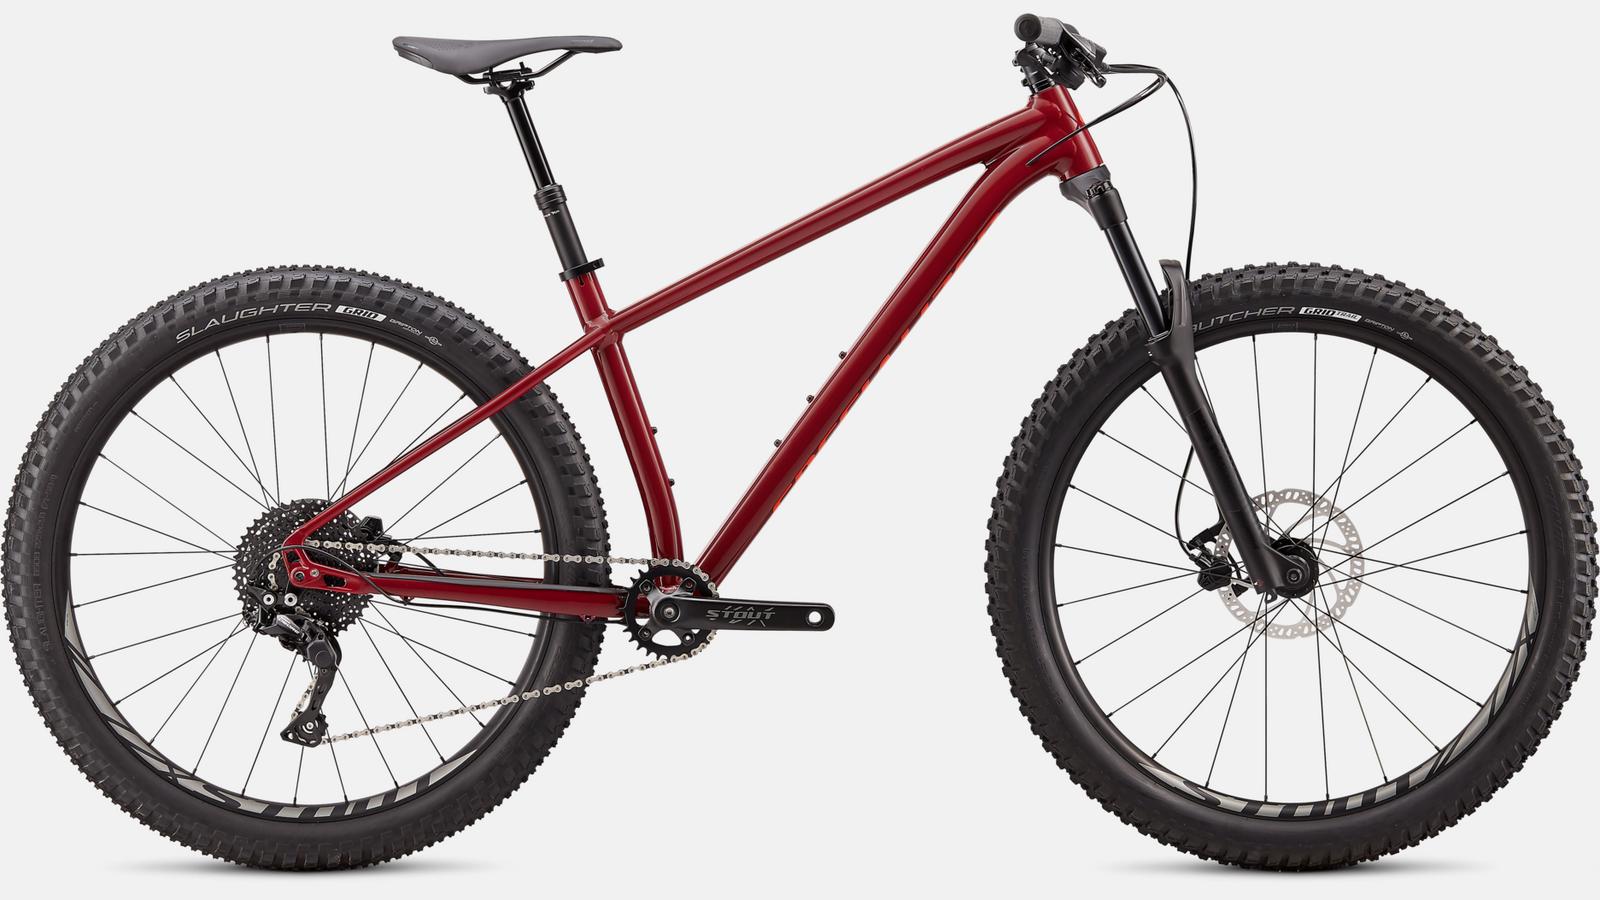 Touch-up paint for 2020 Specialized Fuse 27.5 - Gloss Crimson